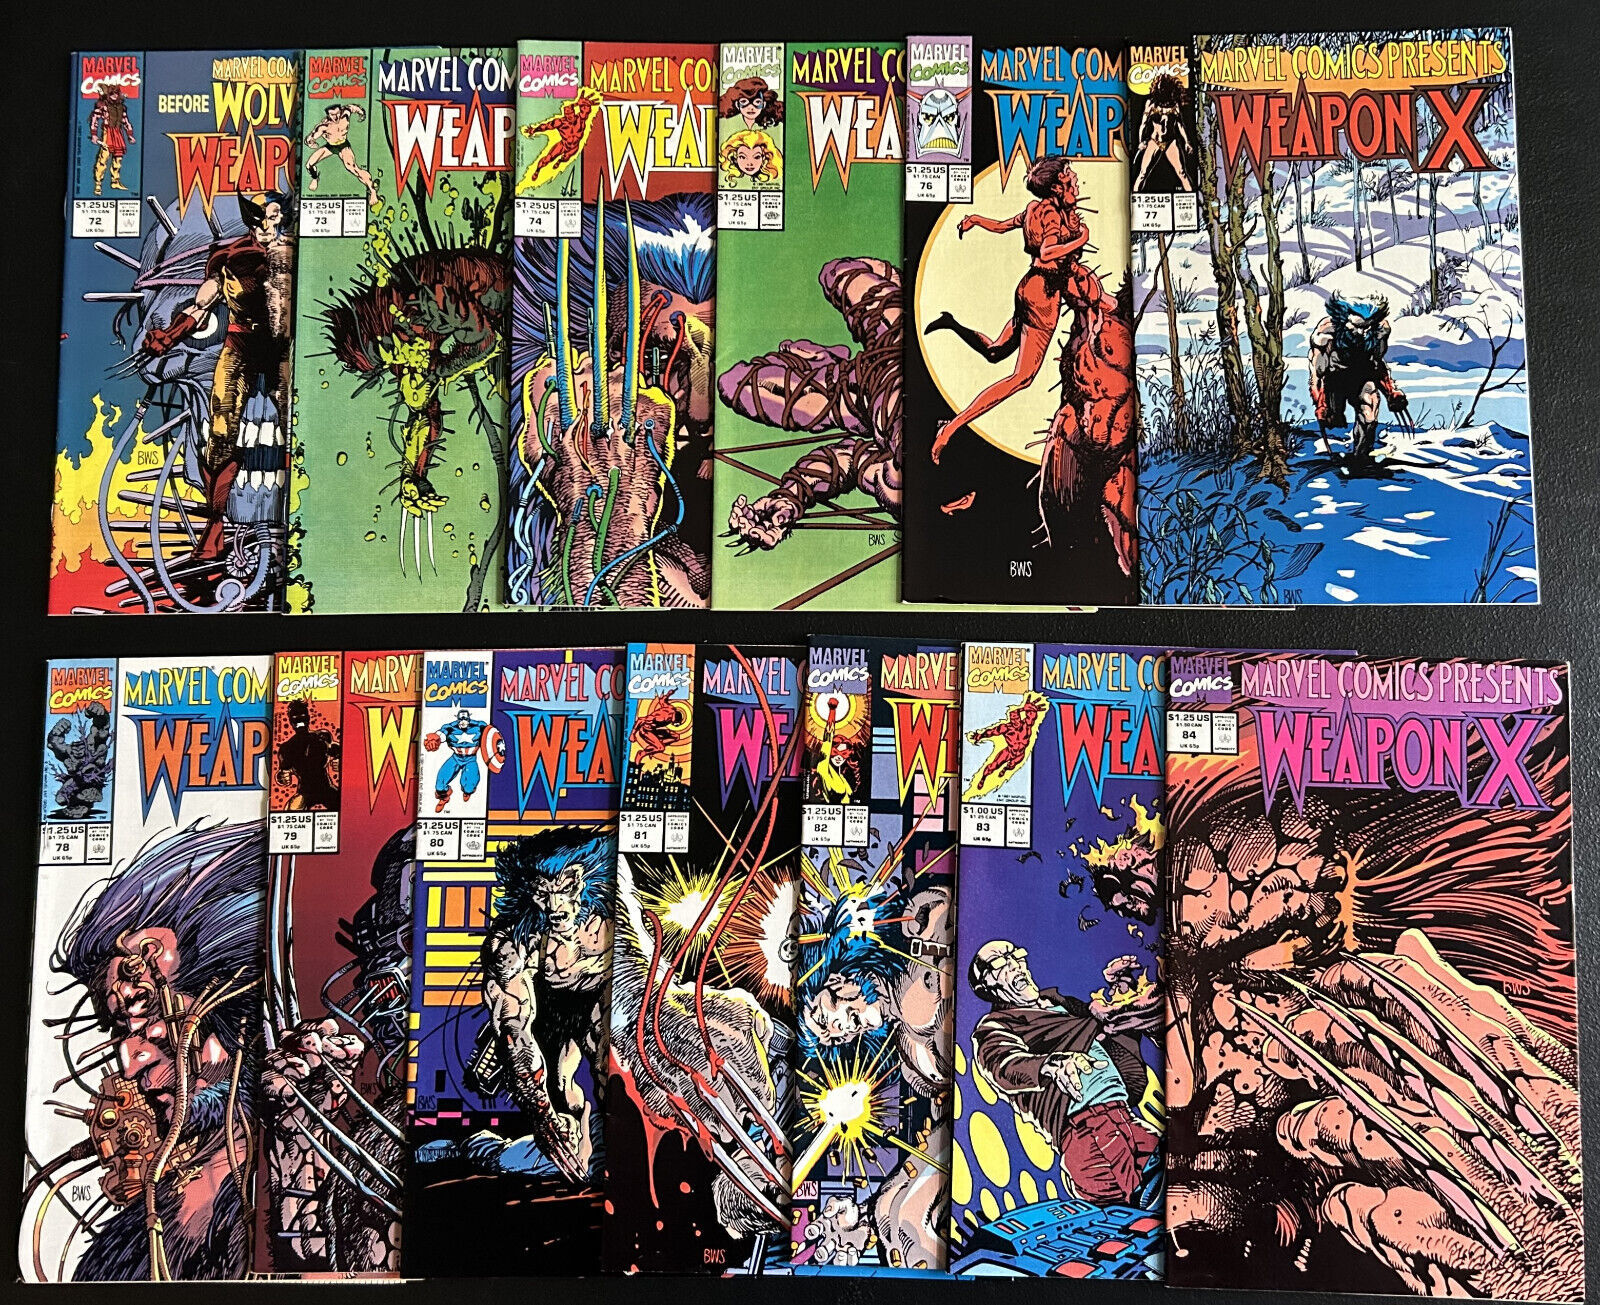 Marvel Comics Presents: Wolverine 72-84 (Entire Weapon X Series) (Lot of 13) 